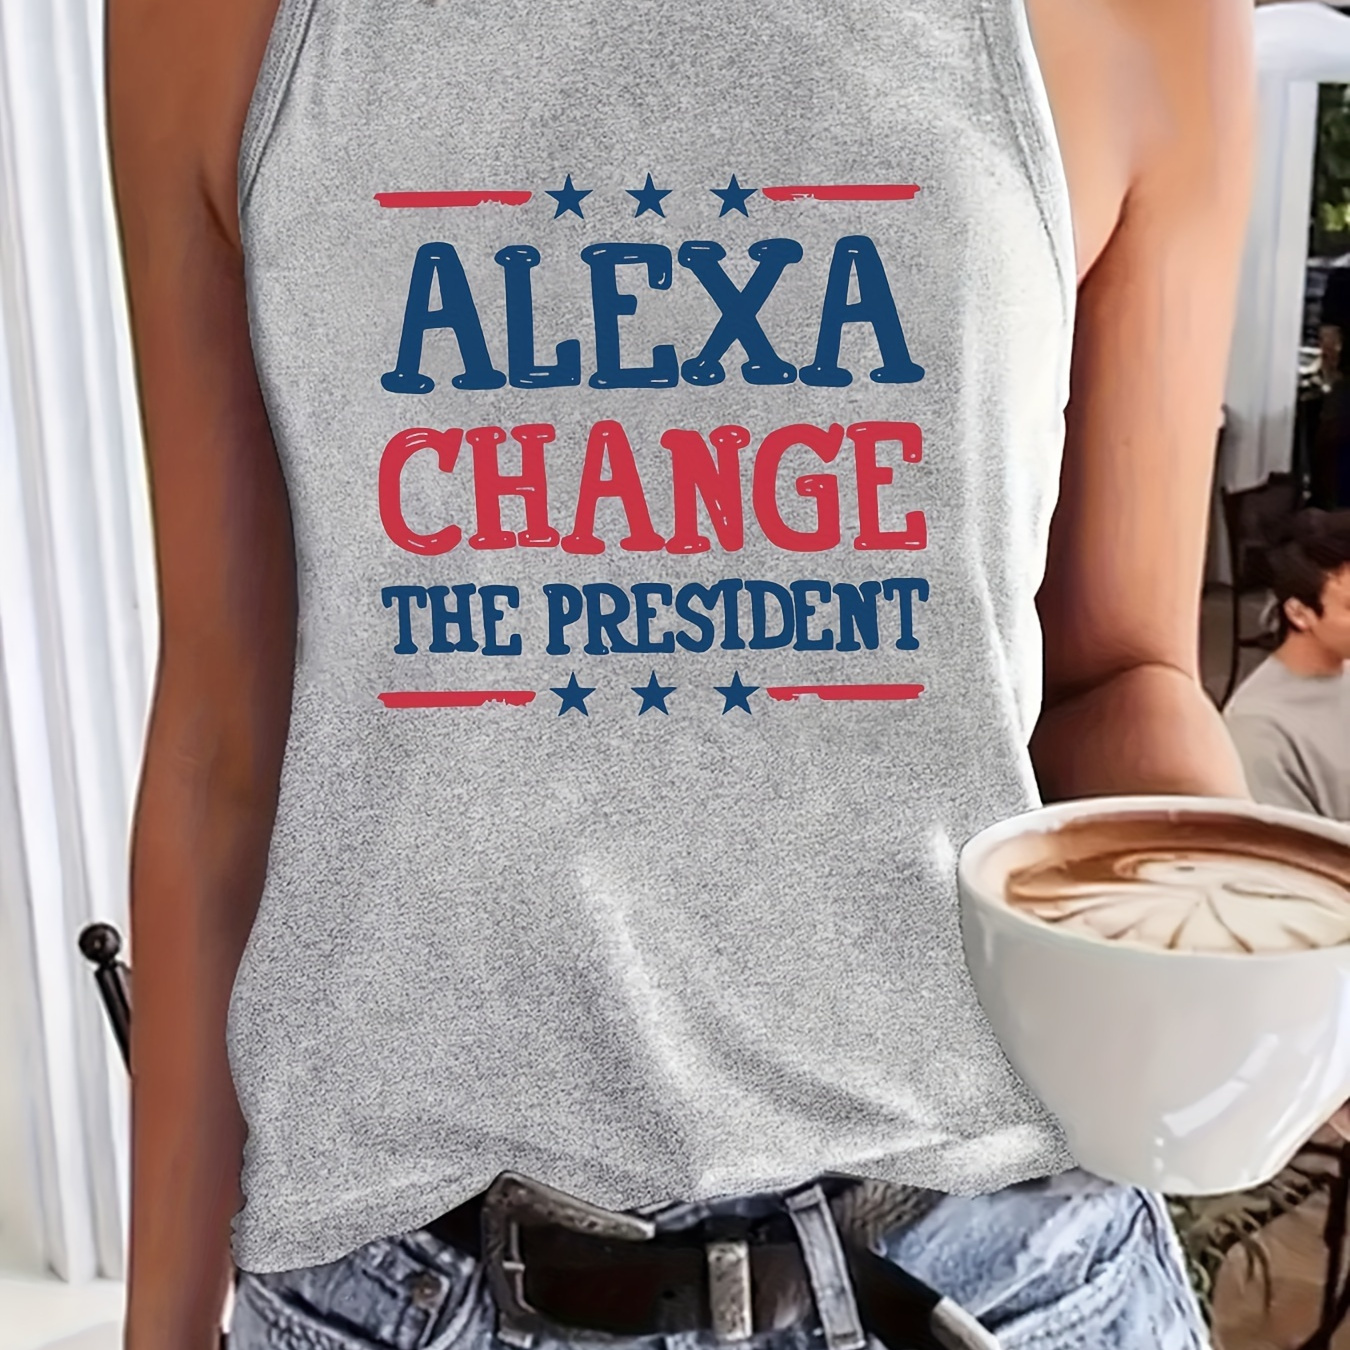 

Women's Casual Sleeveless Tank Top, With Contrast Lettering "alexa Change The President", Round Neck, Fashion Summer Vest